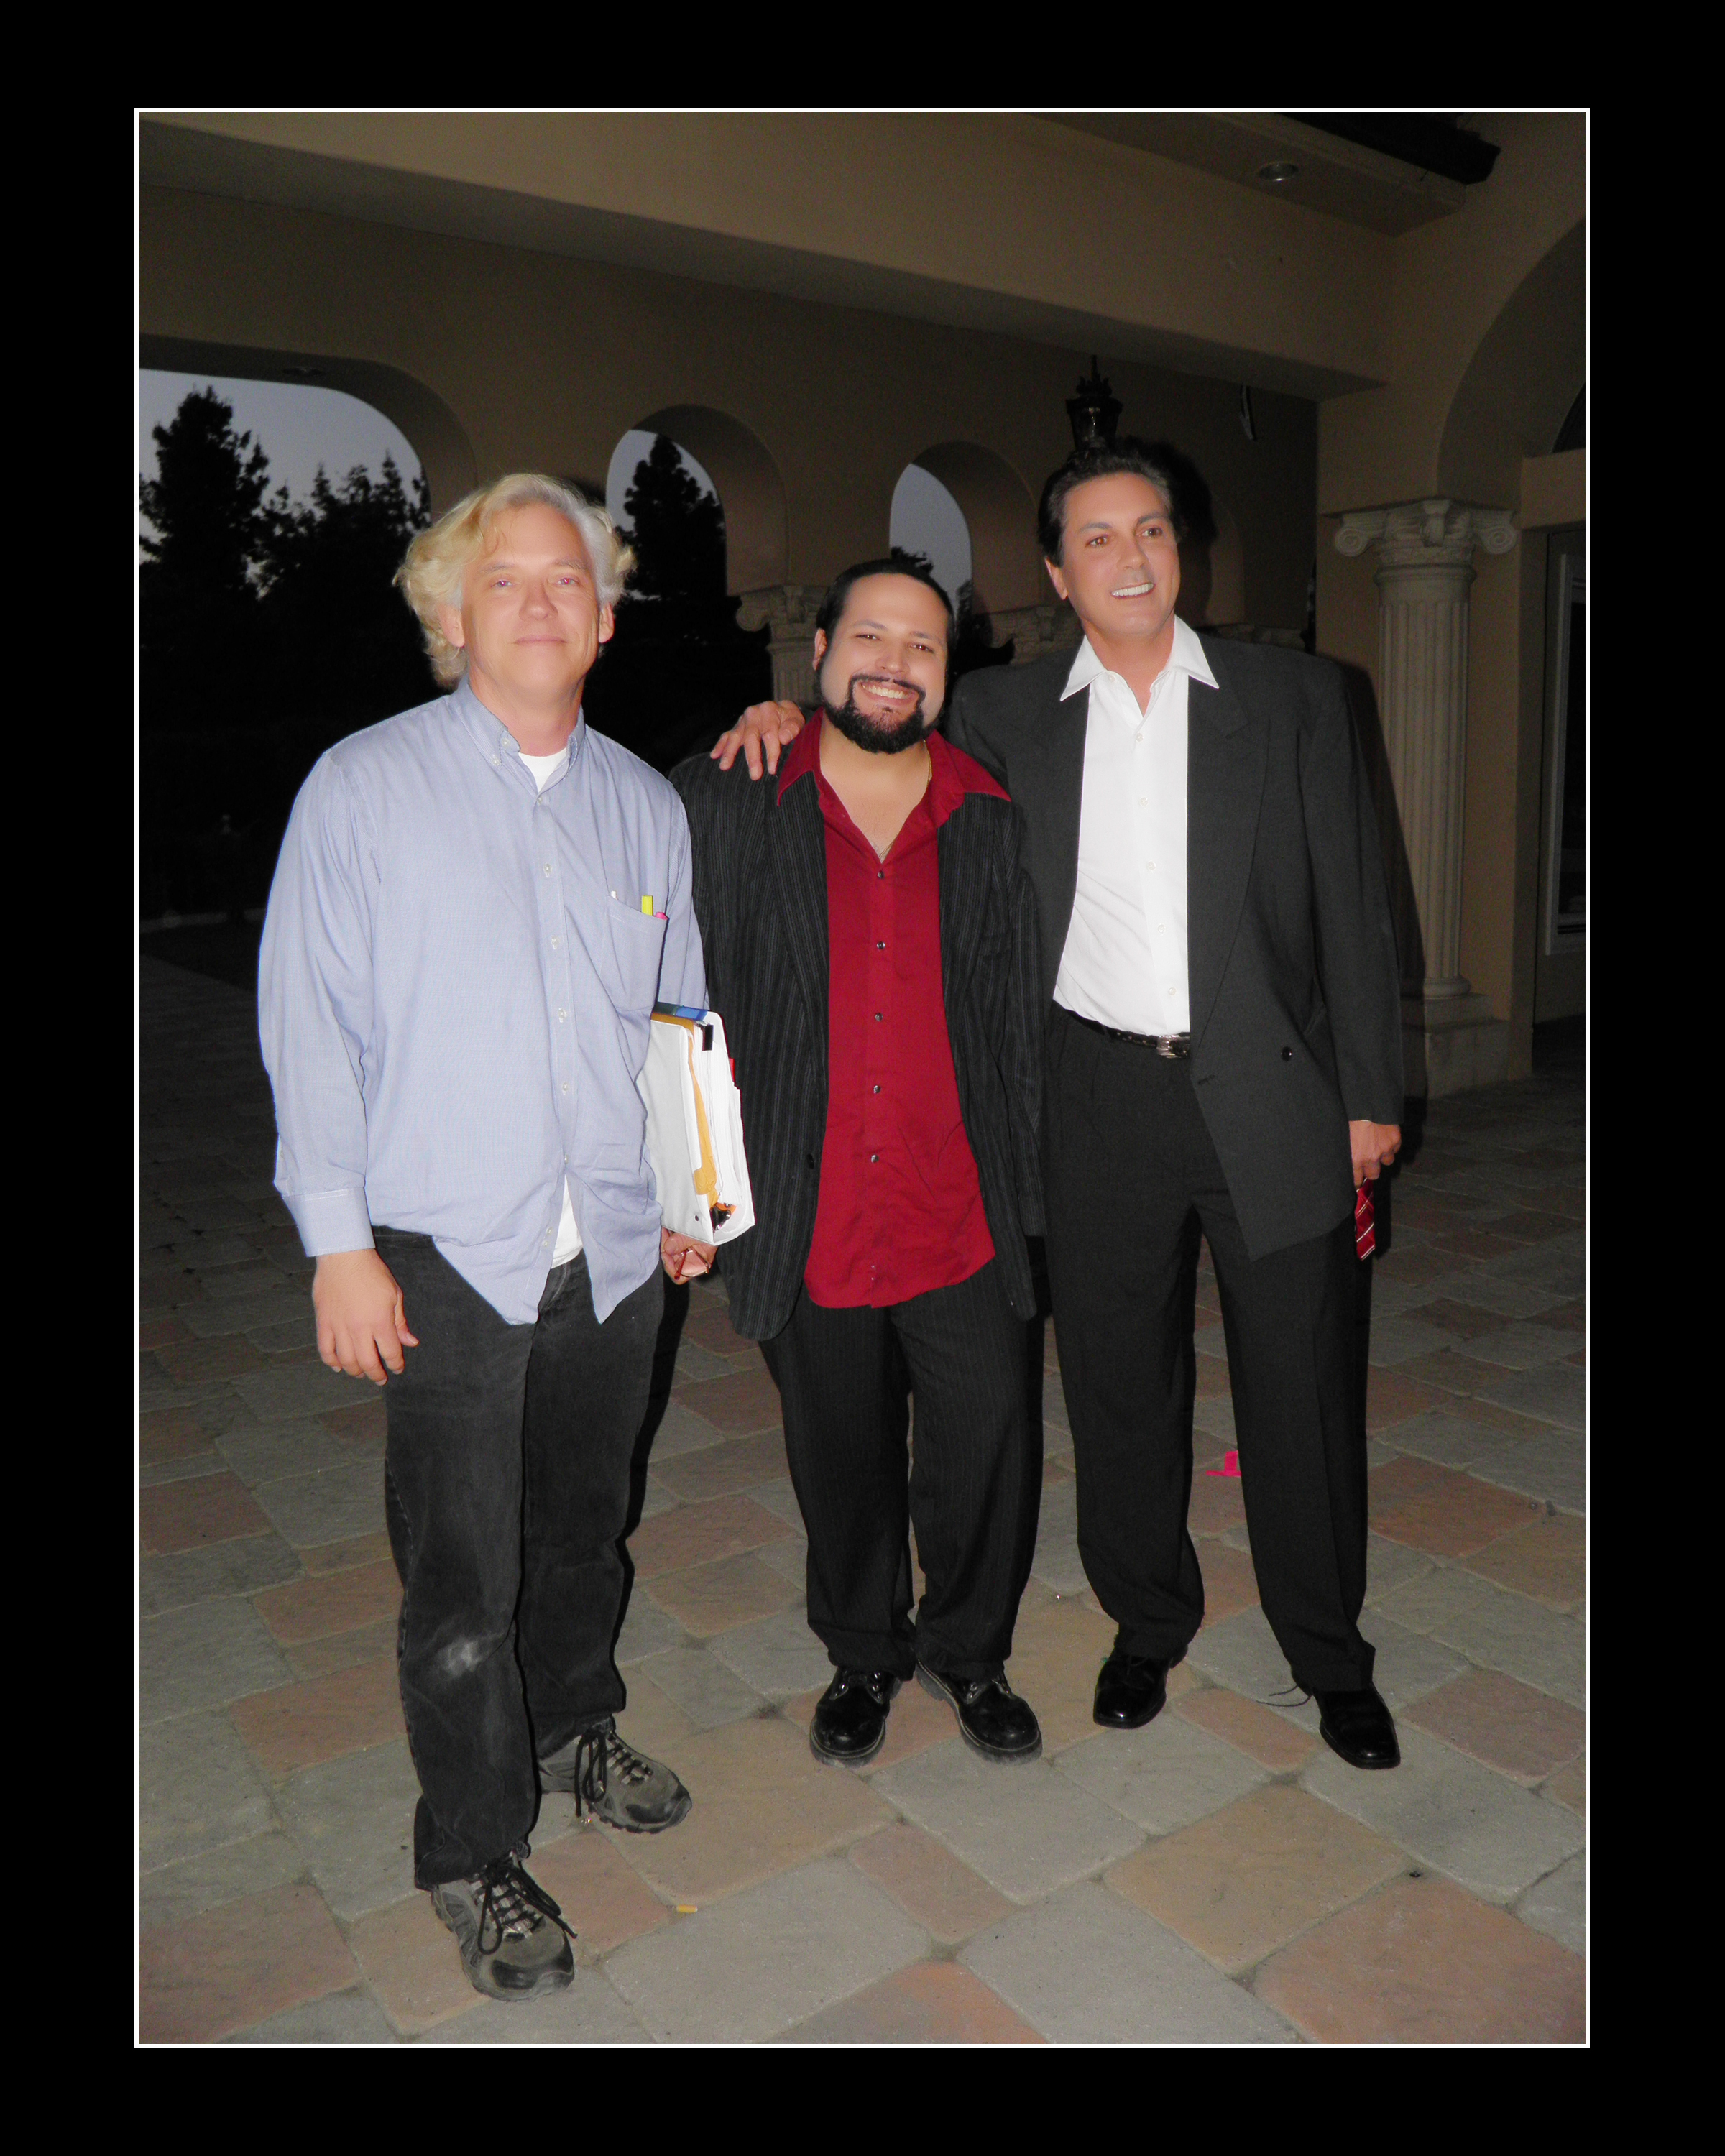 Mike Donahue, Mike Quiroga, and Tyrone Power Jr. Mansion of Blood (2011)